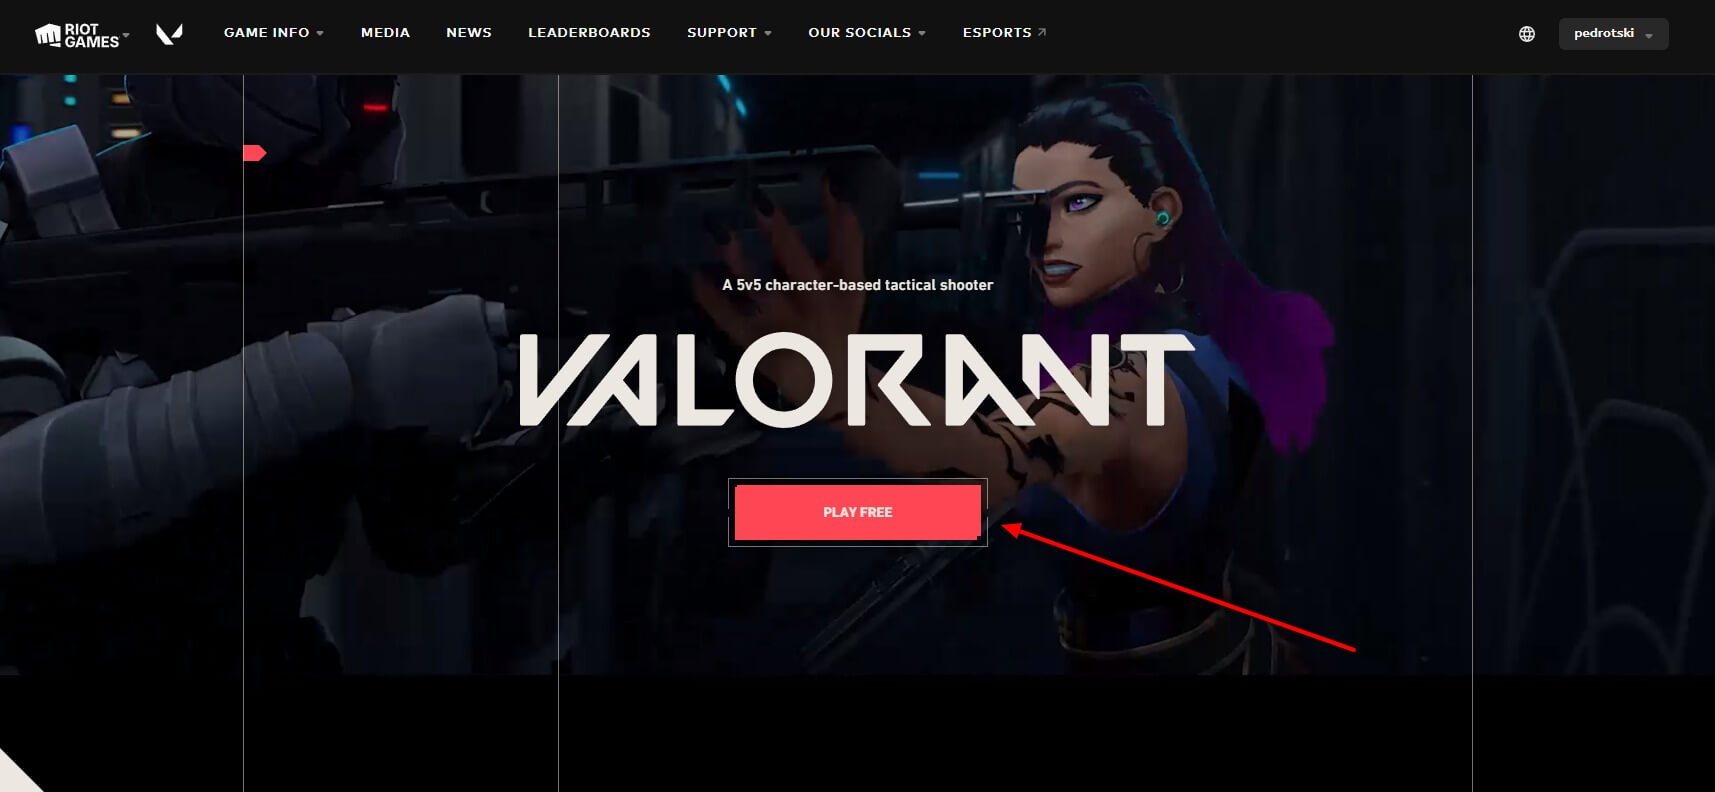 VALORANT-Riot-Games’-competitive-5v5-character-based-tactical-shooter